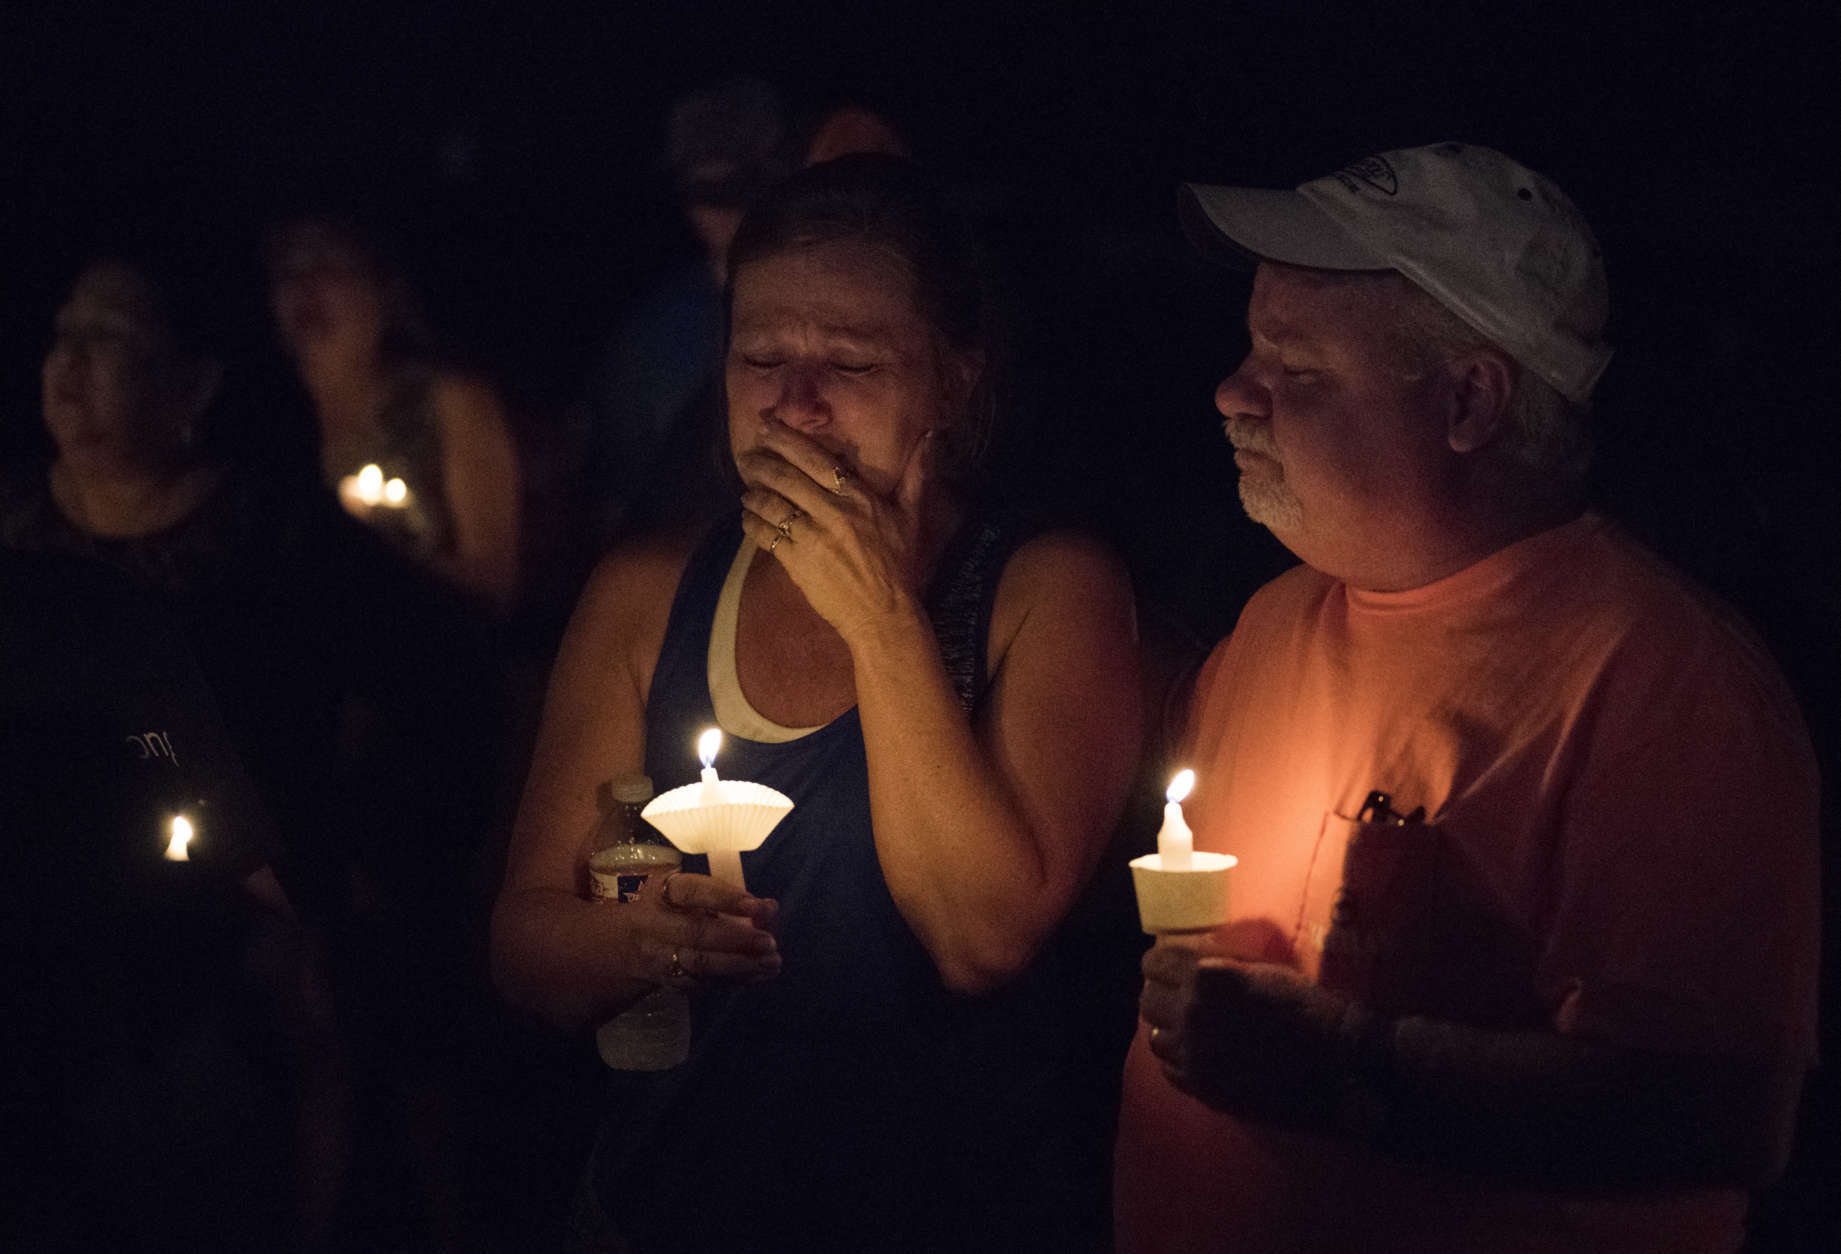 Mourners participate in a candlelight vigil for the victims of a fatal shooting at the First Baptist Church of Sutherland Springs, Sunday, Nov. 5, 2017, in Sutherland Springs, Texas. A man dressed in black tactical-style gear and armed with an assault rifle opened fire inside the church in the small South Texas community on Sunday, killing and wounding many. The dead ranged in age from 5 to 72 years old. (AP Photo/Darren Abate)